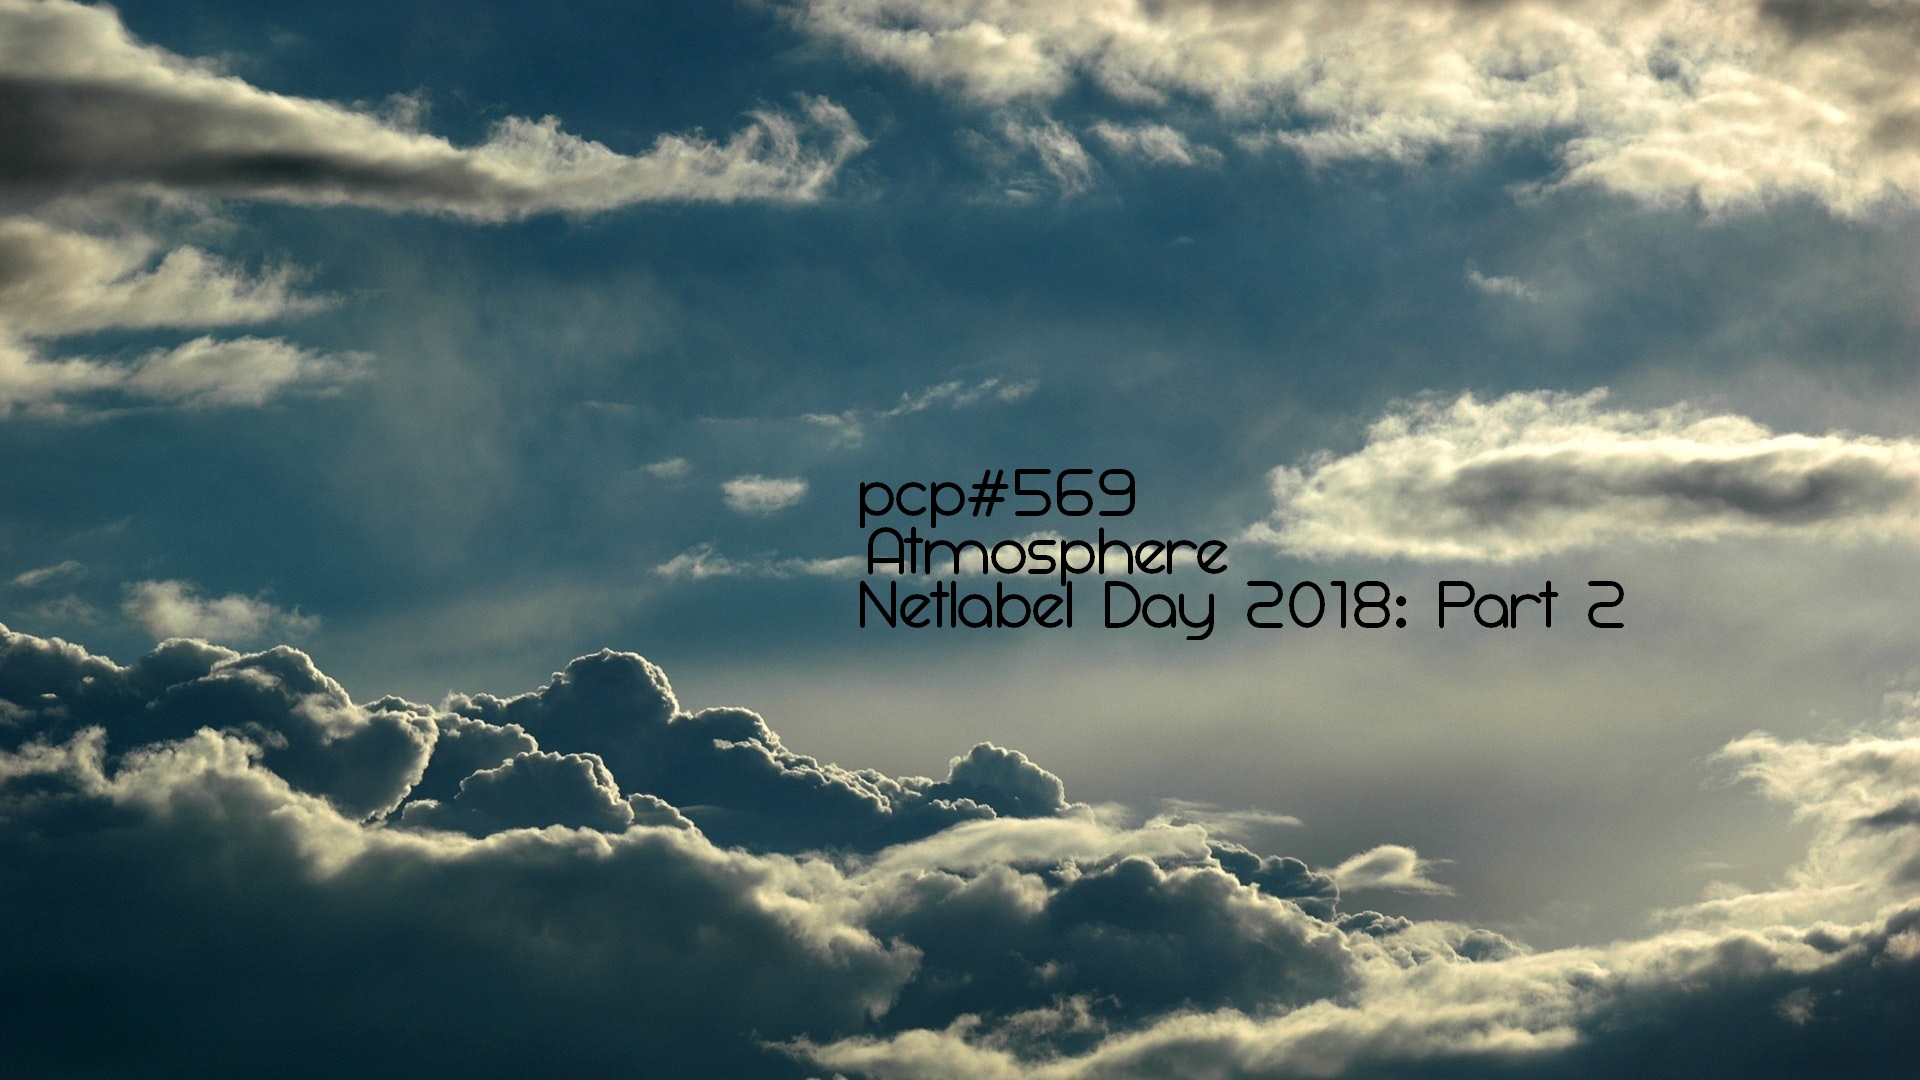 PCP#569... Atmosphere. Netlabel Day 2018: Part 2....